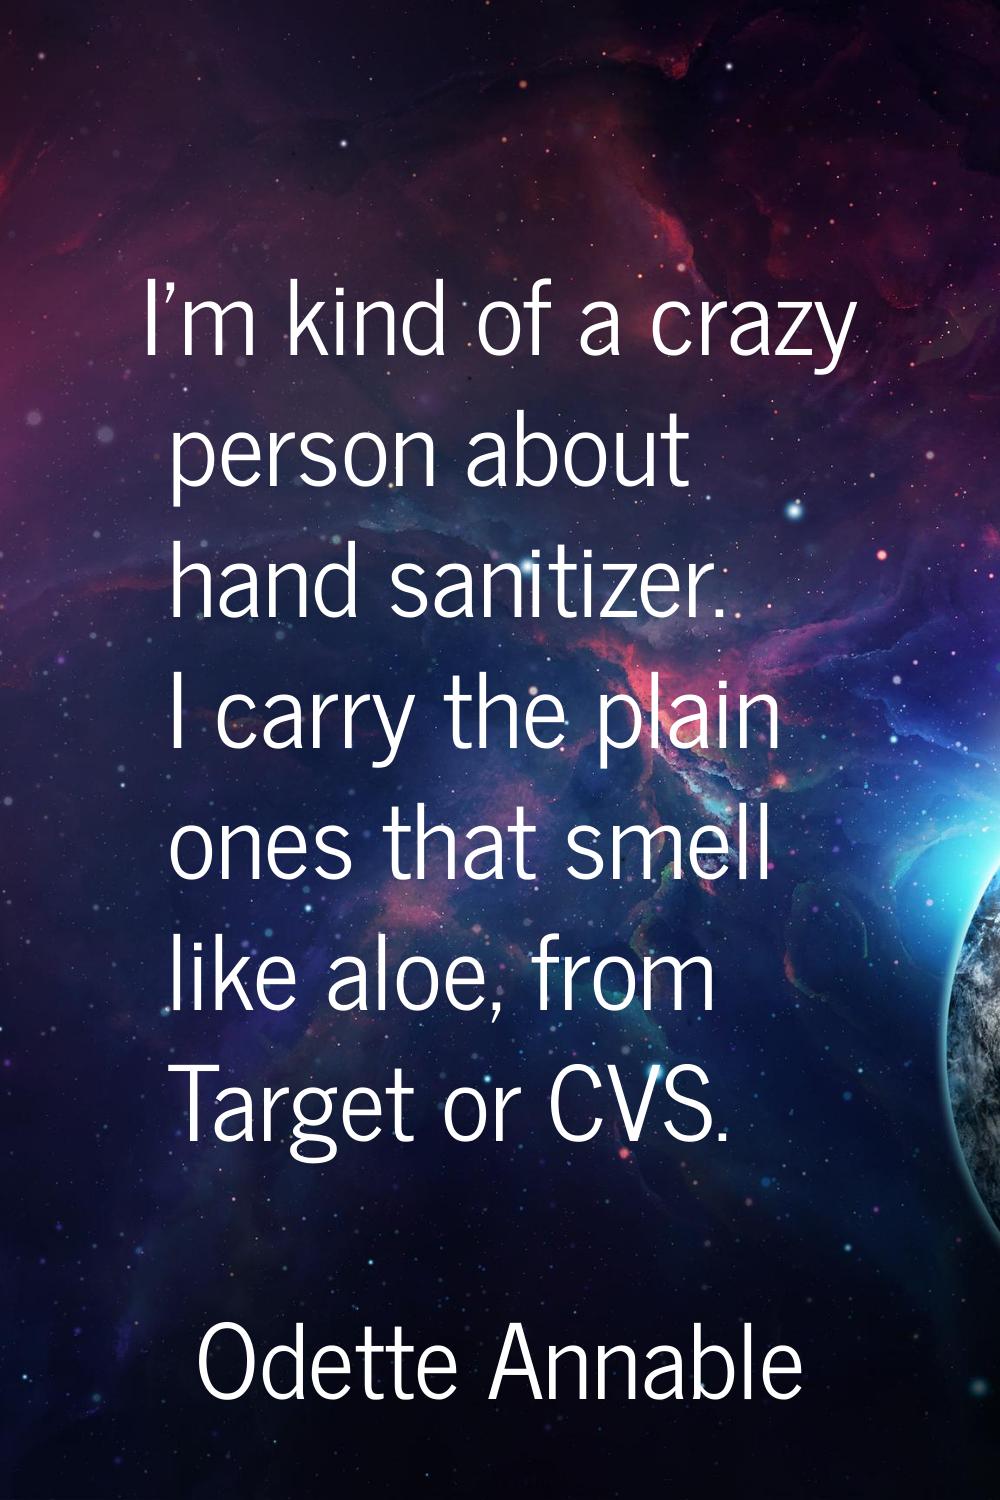 I'm kind of a crazy person about hand sanitizer. I carry the plain ones that smell like aloe, from 